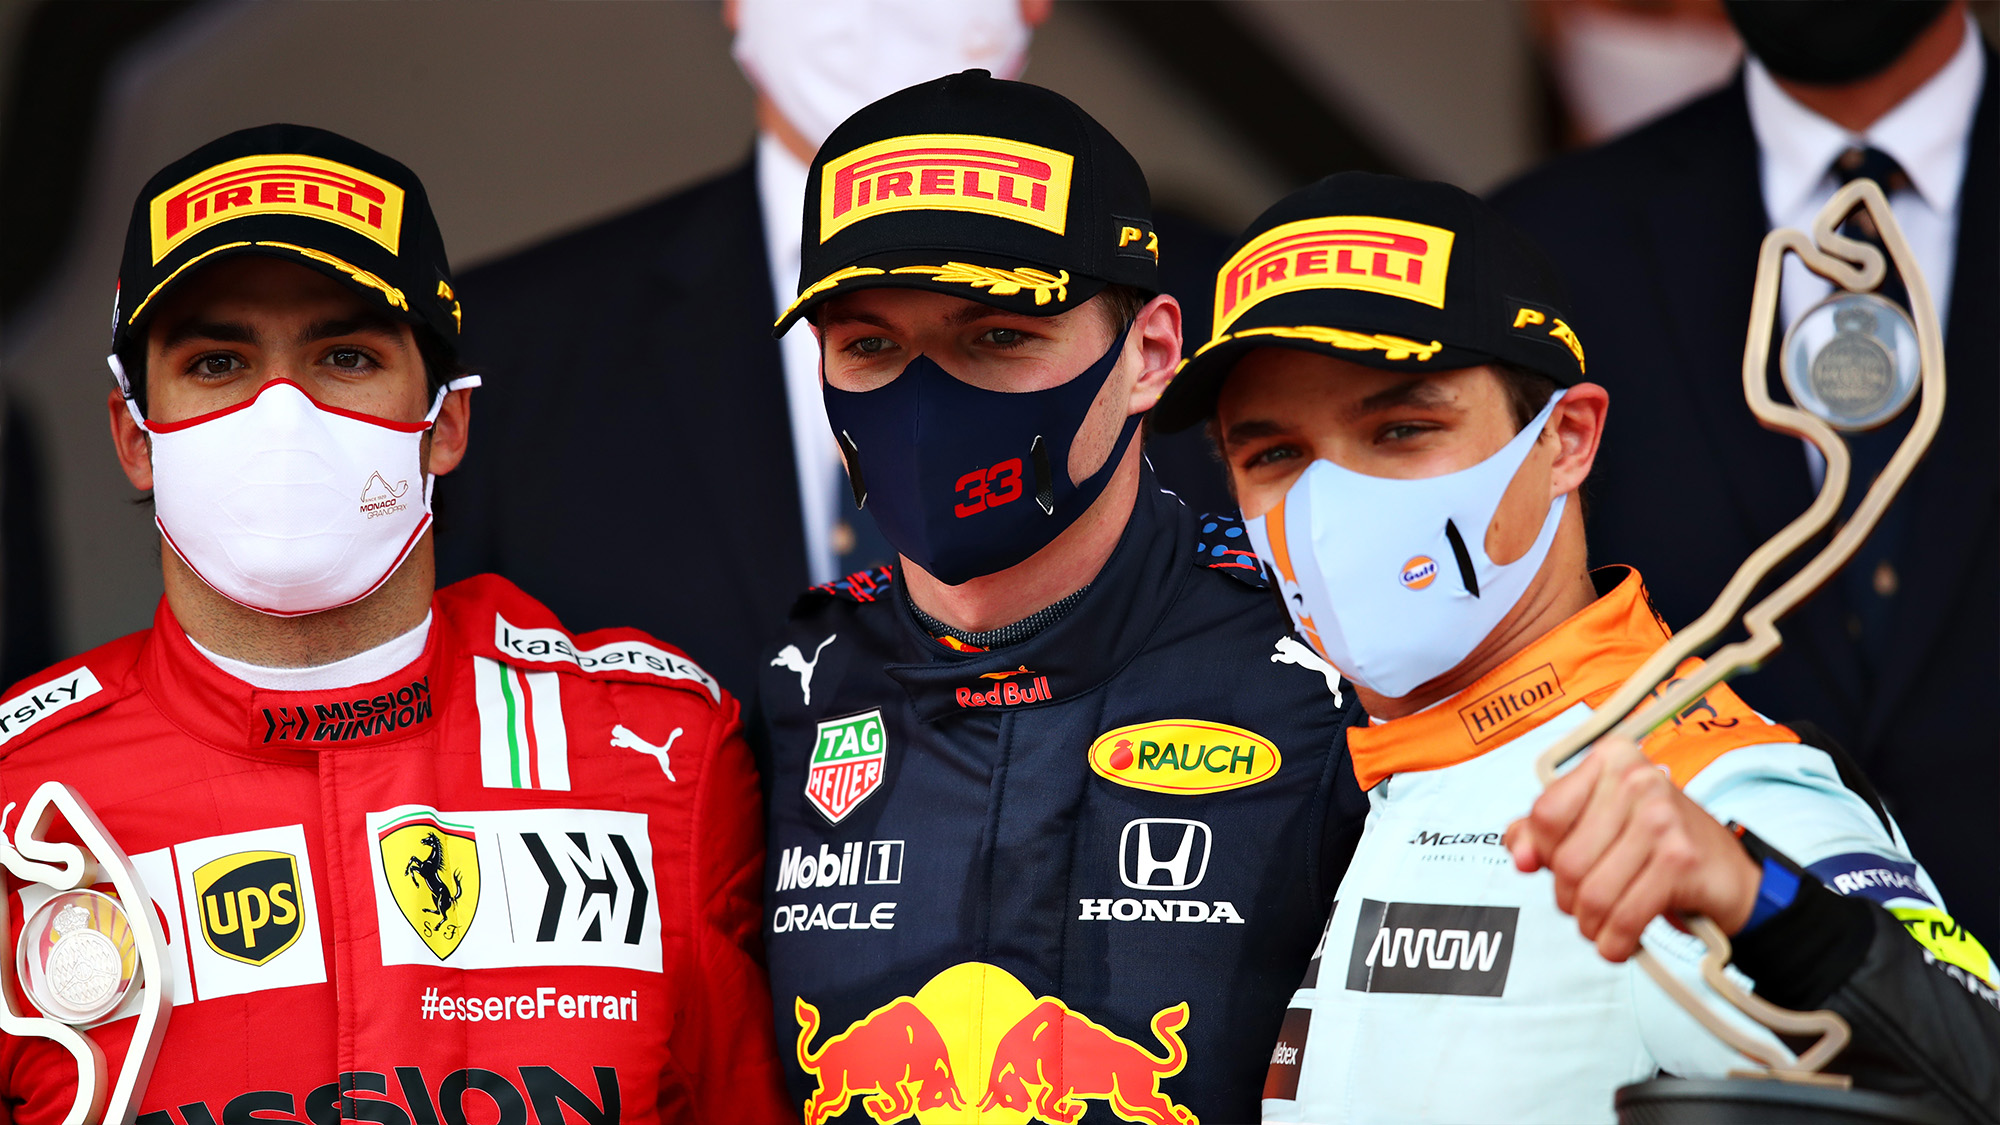 Verstappen wins Monaco GP leading the championship, Sainz second and Norris third as Hamilton finishes seventh